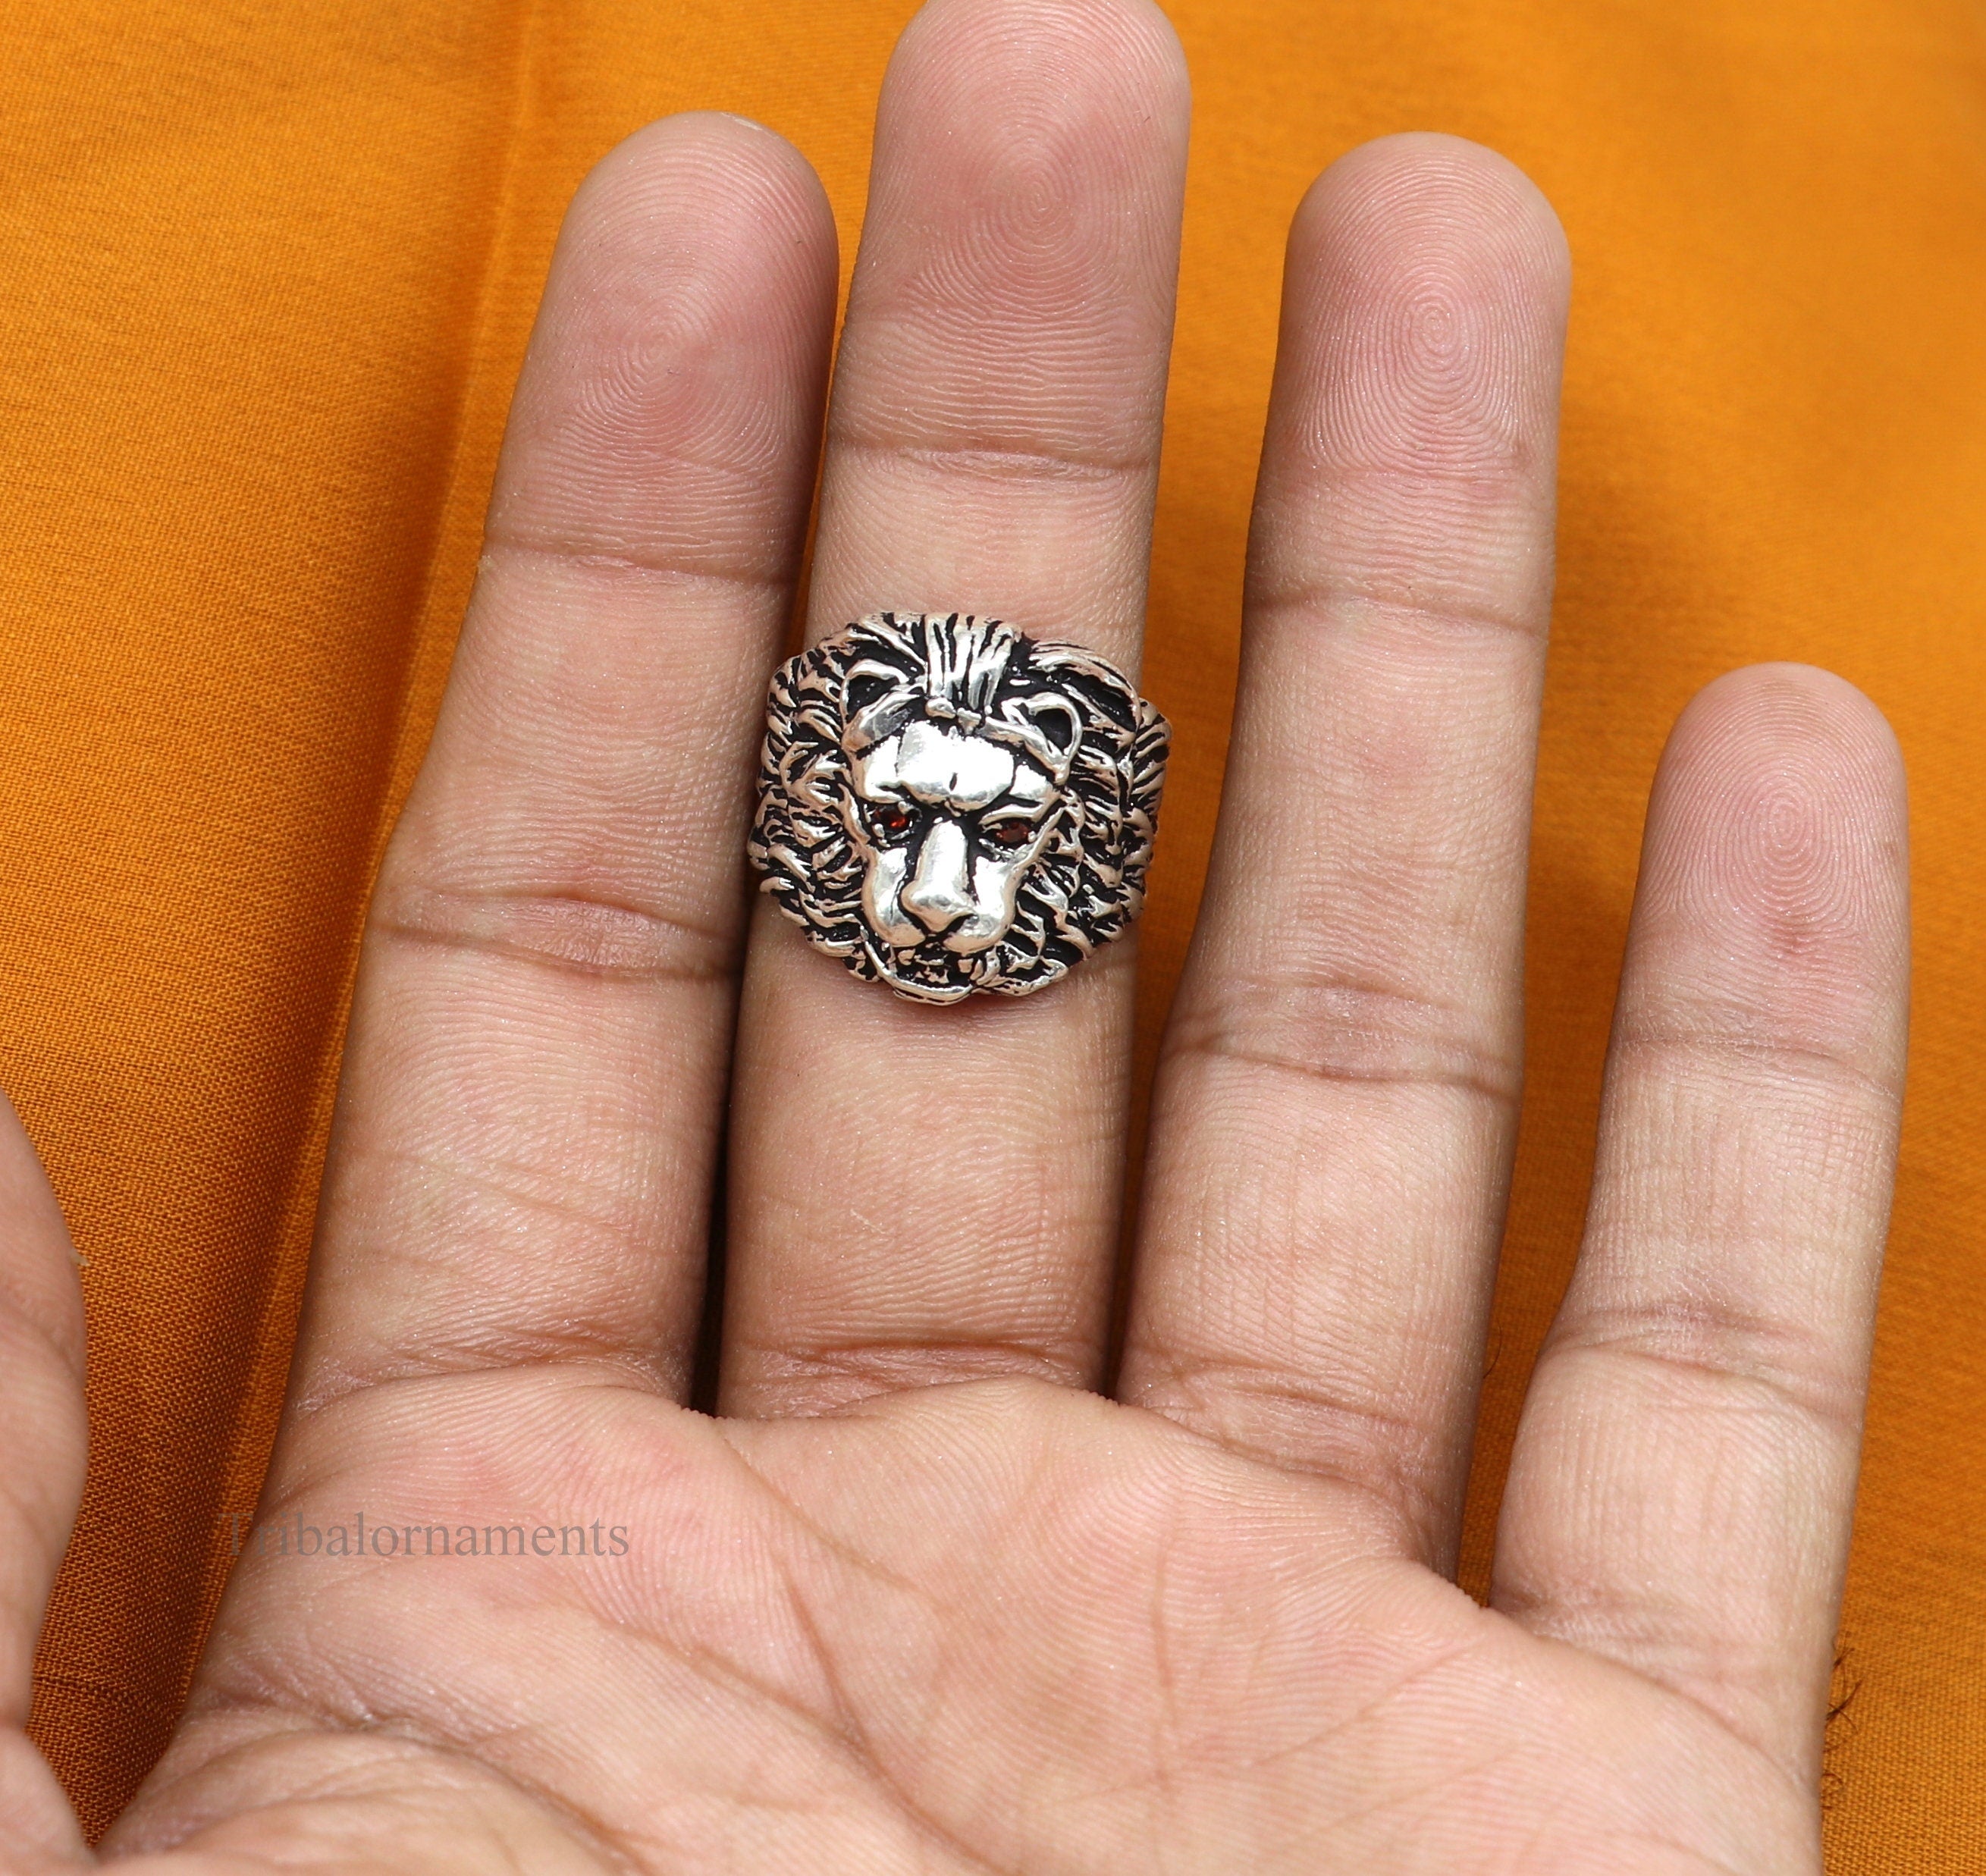 Retailer of 916 gold gents lion ring | Jewelxy - 85019